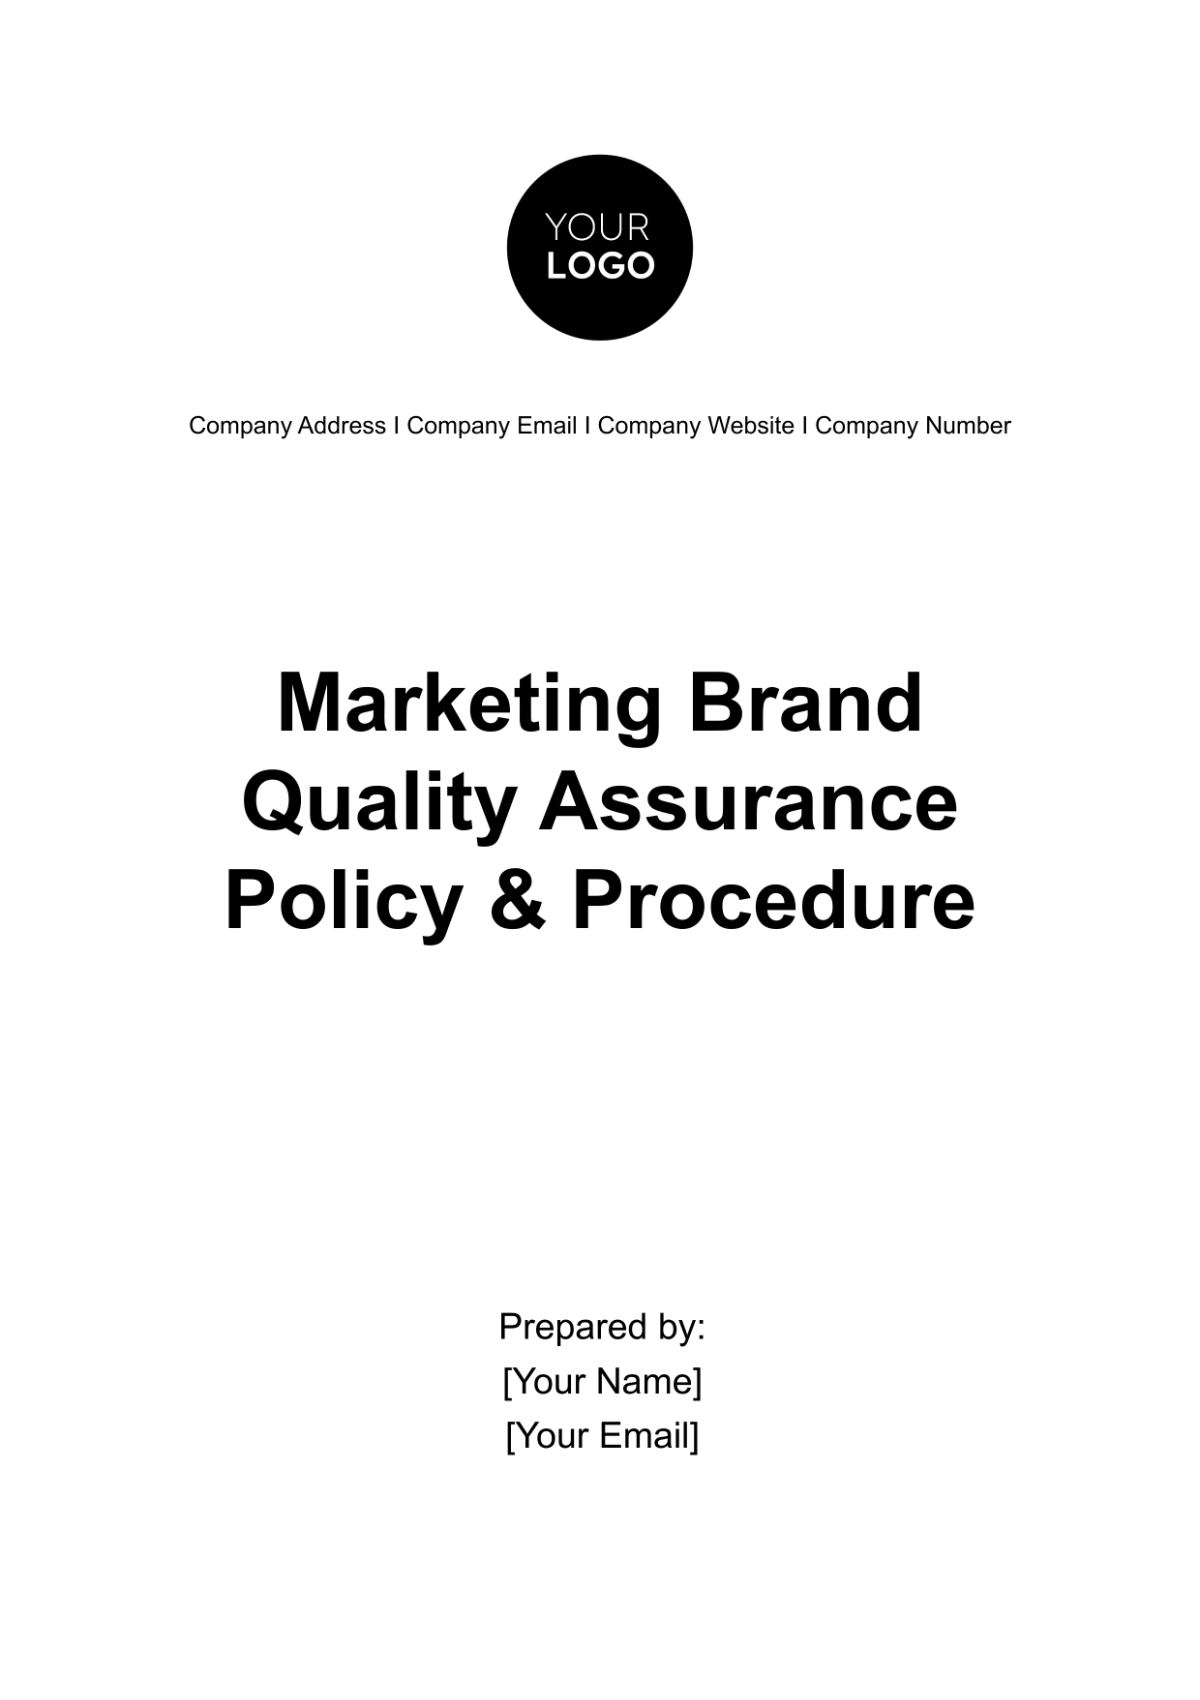 Marketing Brand Quality Assurance Policy & Procedure Template